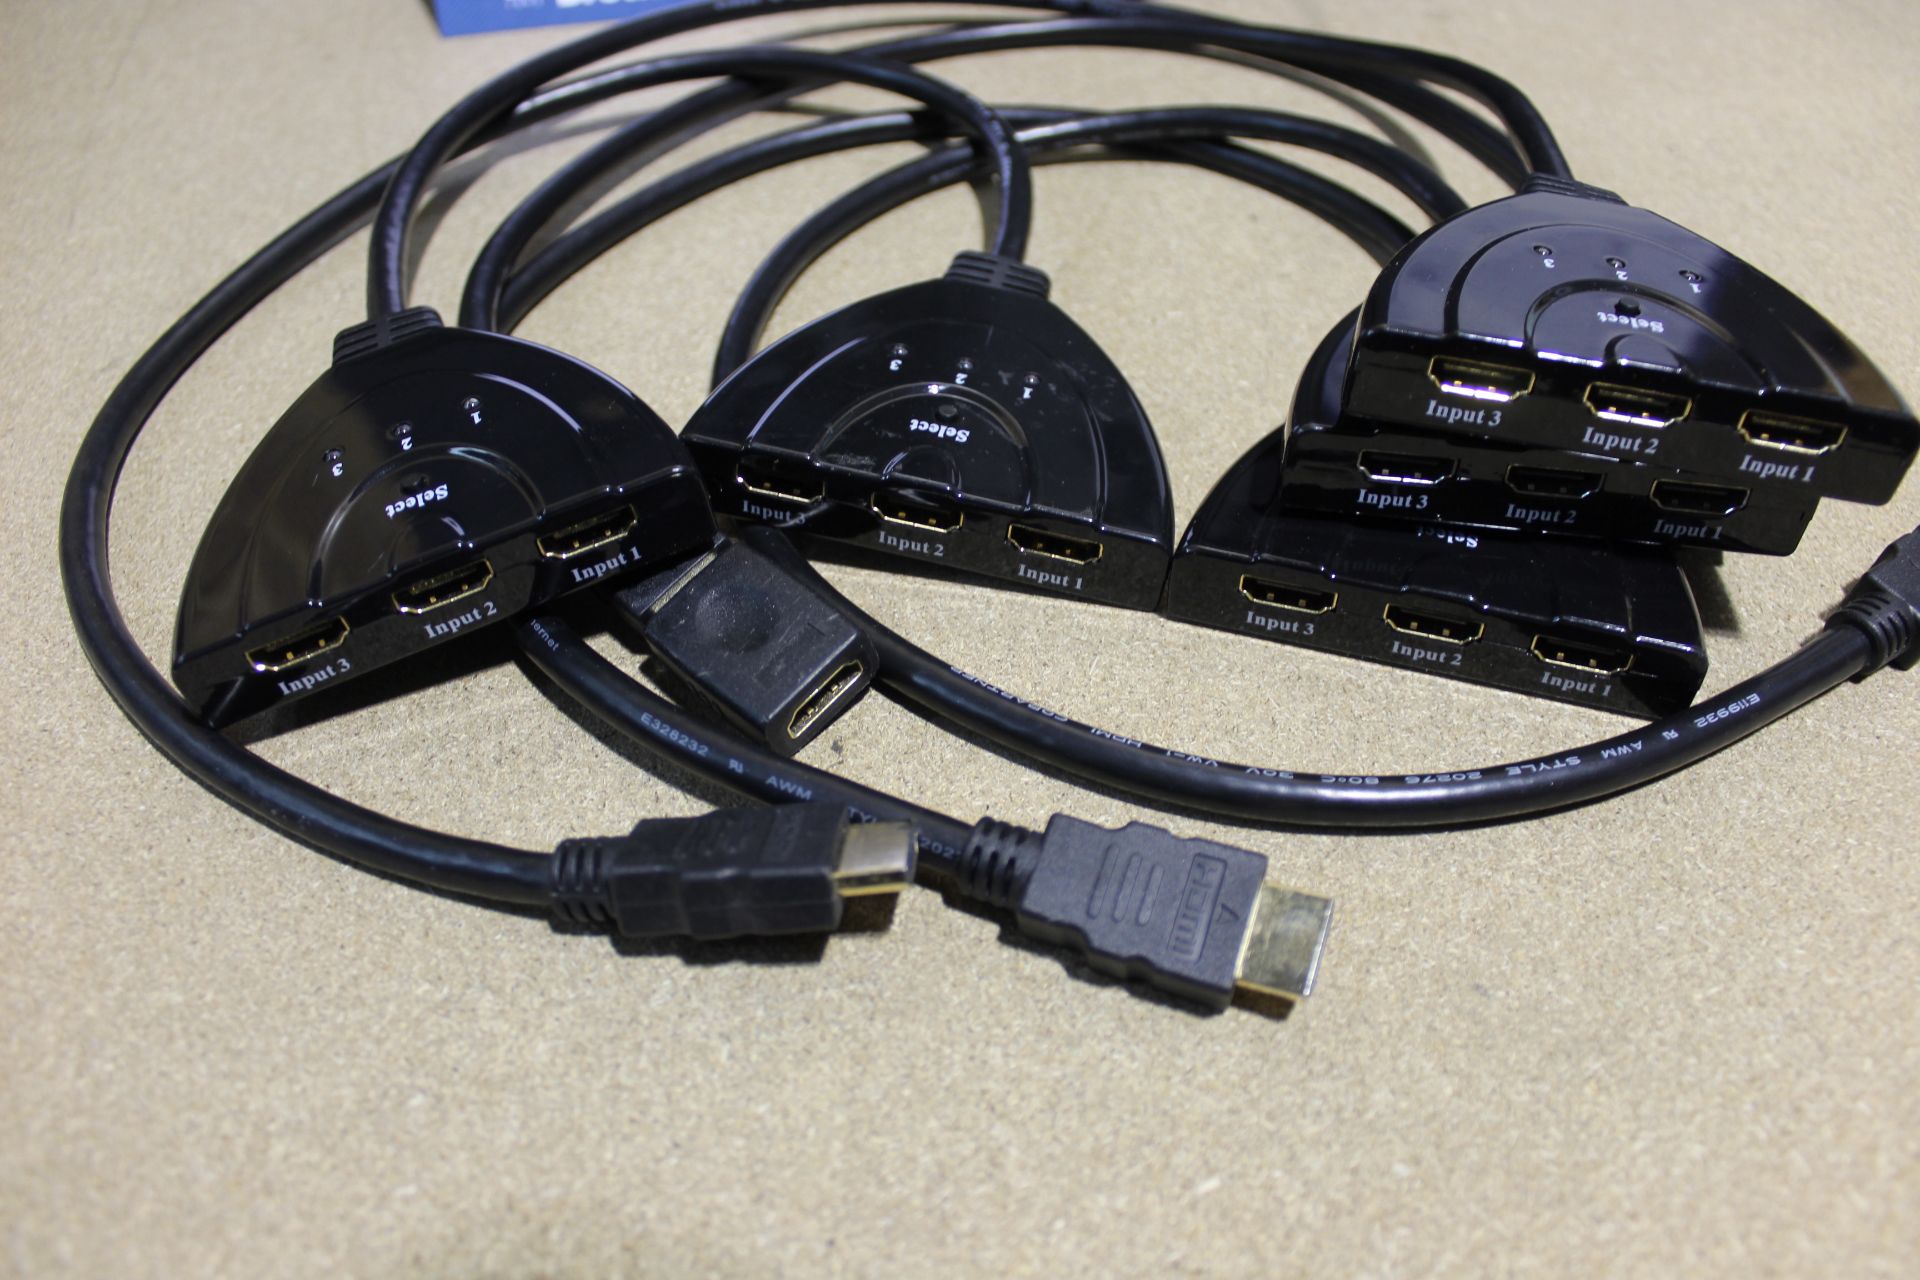 5x Digiflex HDMI 3 way switchers each in carry case (Purchased in 2013). Weight: 1kg each - Image 2 of 2